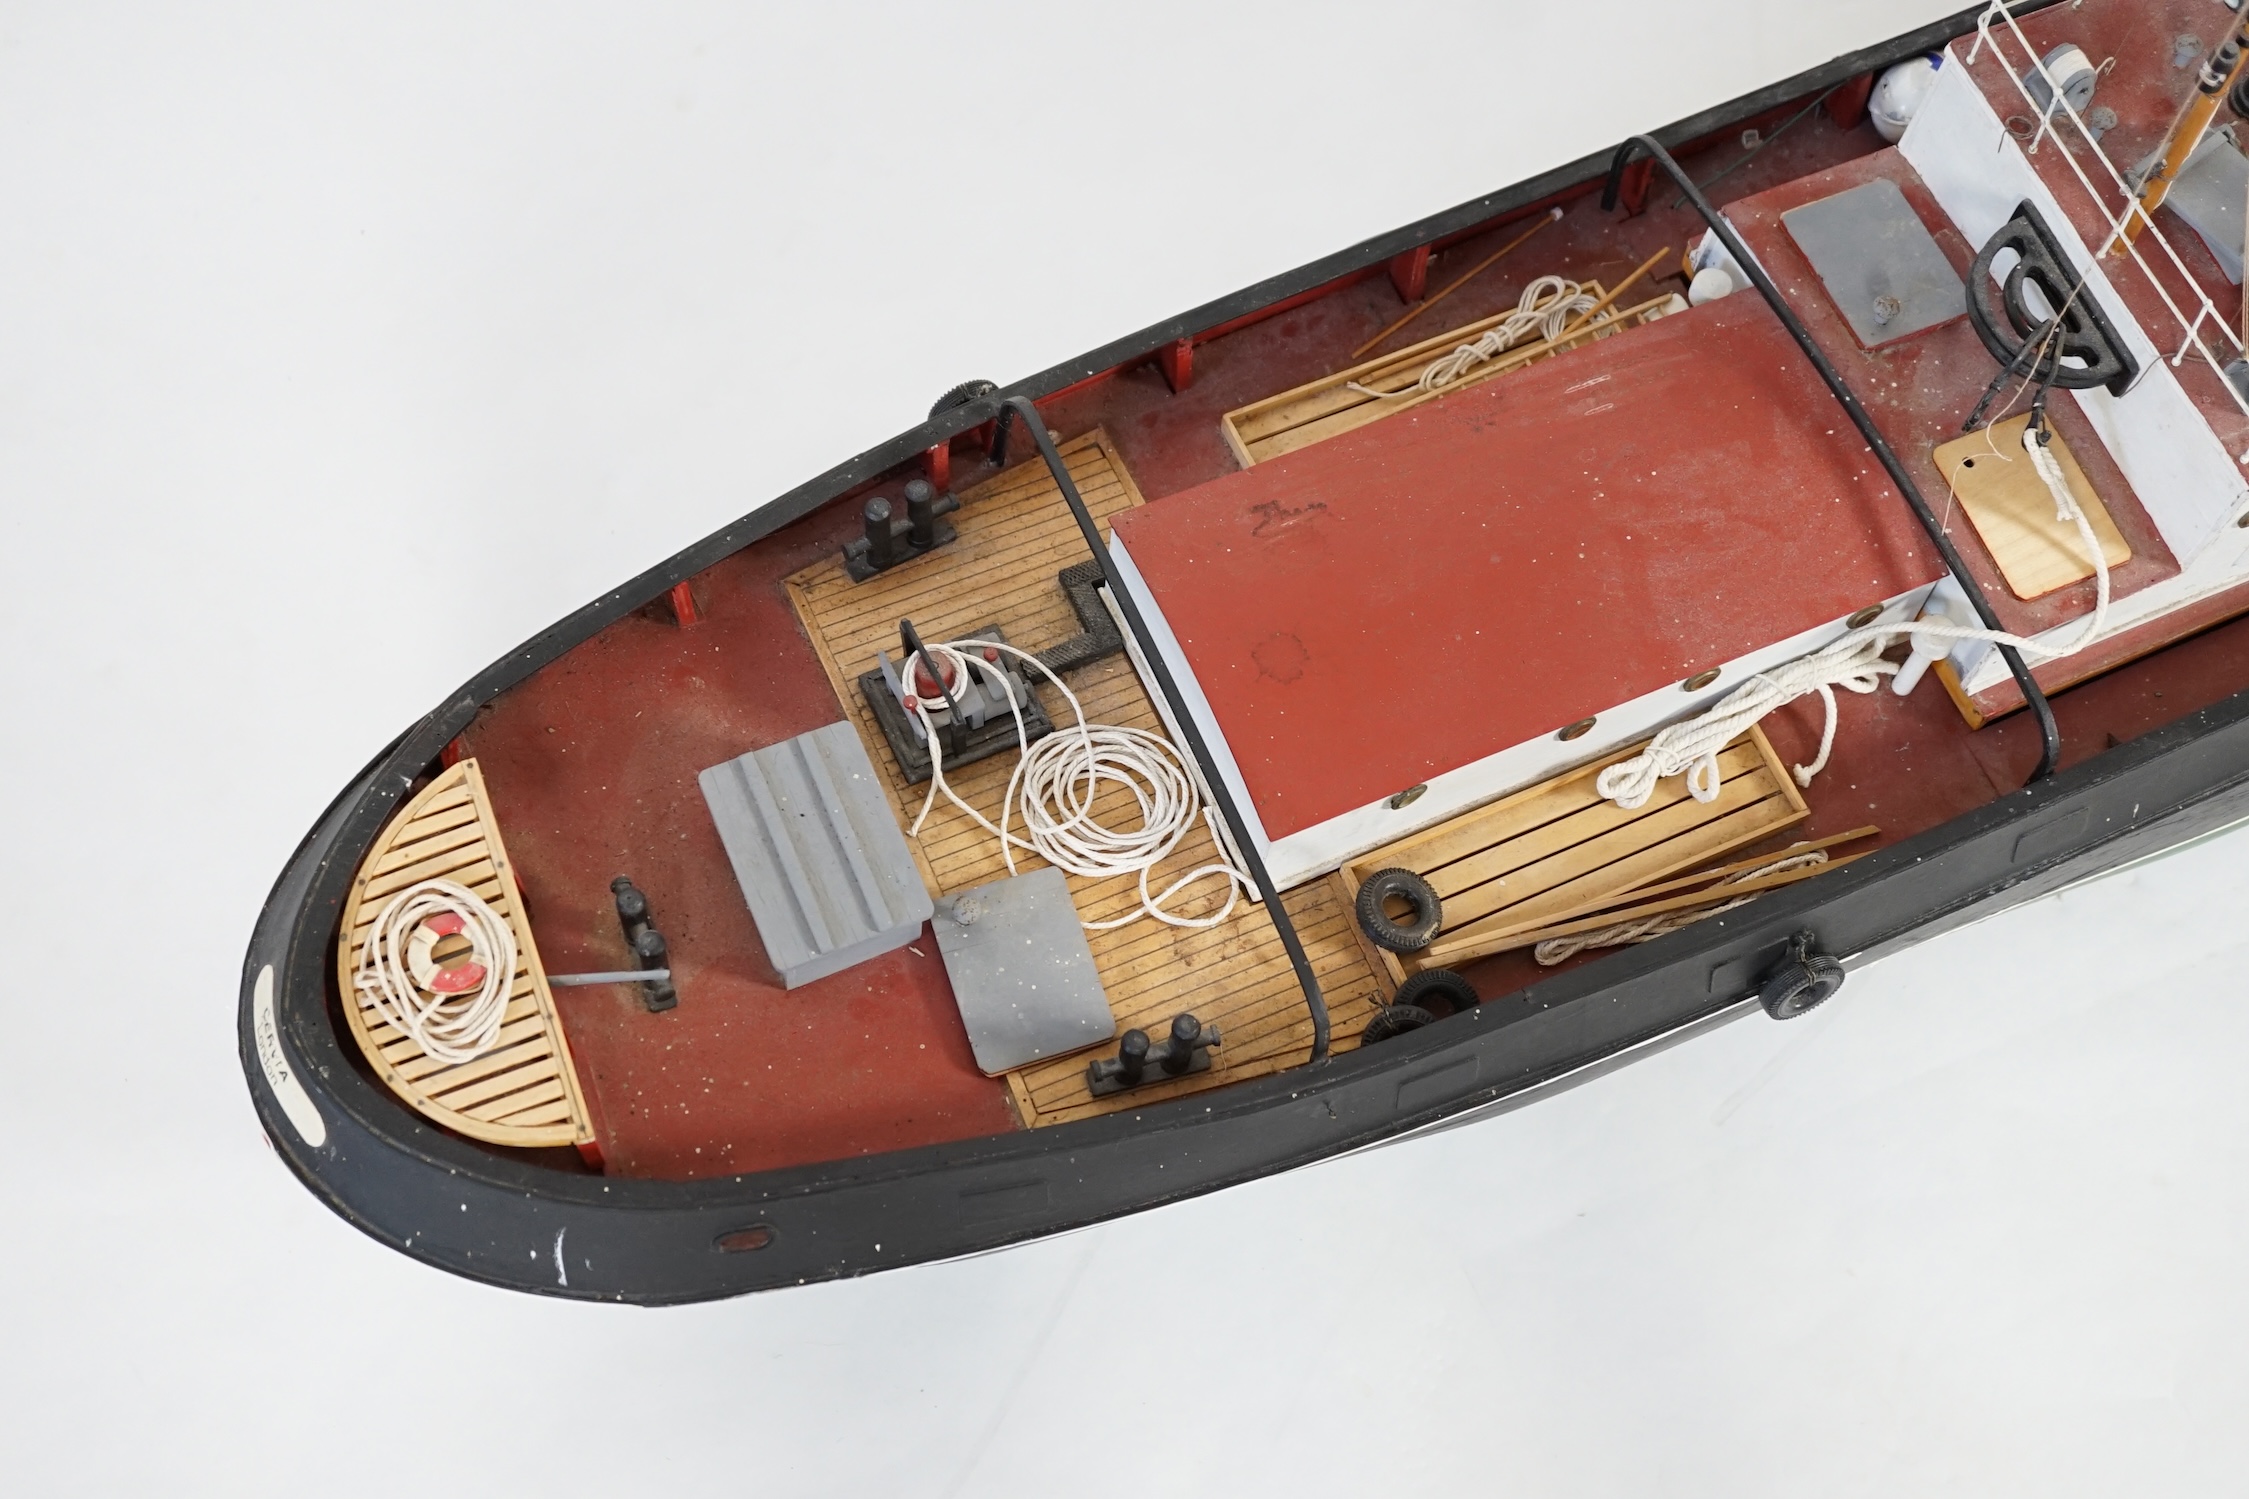 A kit built Maxwell Hemmens pond yacht style model of a 1930s Thames Tug after the firm Watkin & Sons, 150cm long